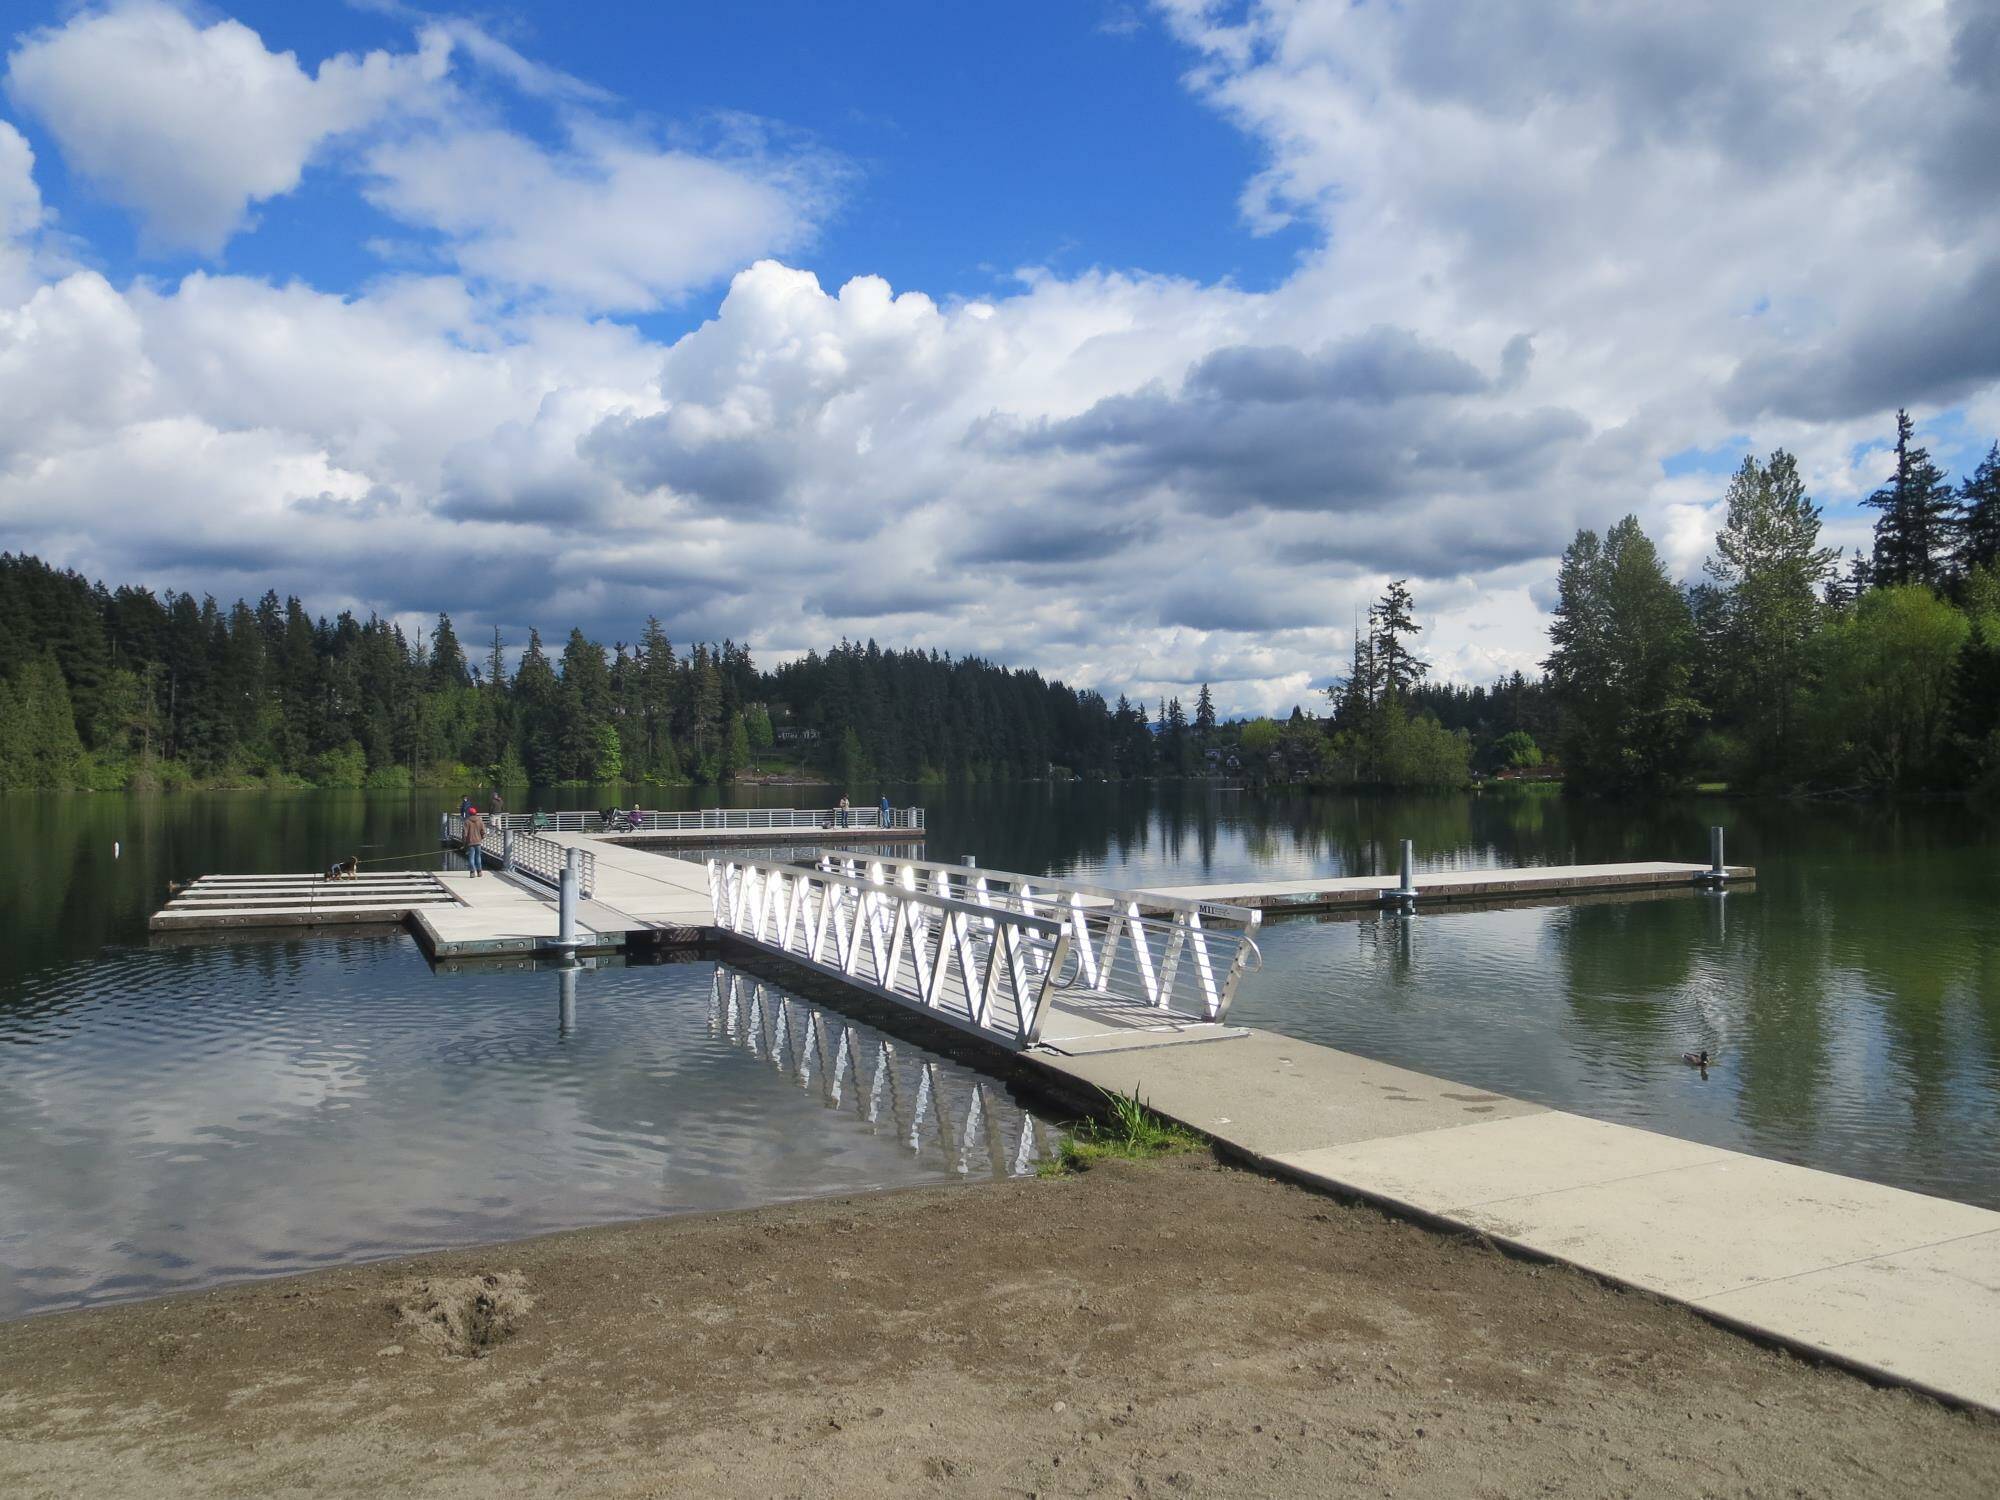 Make sure to check the water for any algae blooms before you plunge into Lake Wilderness — or any other body of water — for your polar bear plunge. Photo courtesy the city of Maple Valley